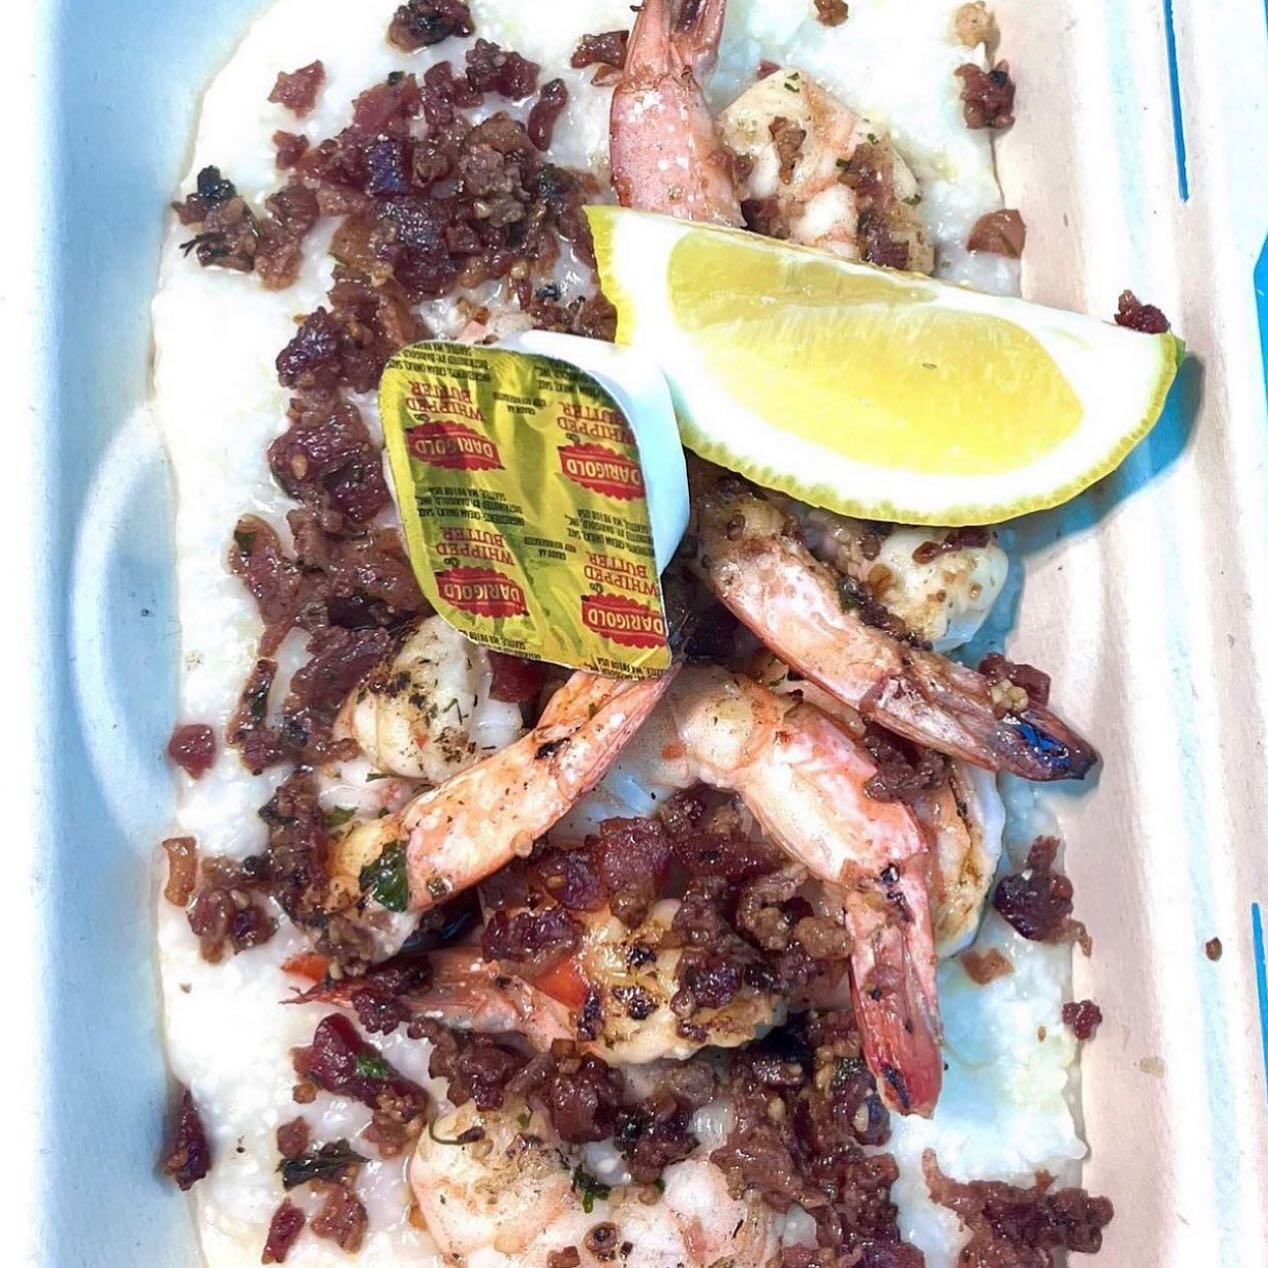 Our friends from Kiss My Grits  @kmgtruck are back with their Shrimp and Grits with bacon, plus their pulled pork Mac n&rsquo; Cheese for a cool summer&rsquo;s day! Come on down to the @fremontsundaymarket for some brunch! #seattlefoodie #eatseattle 